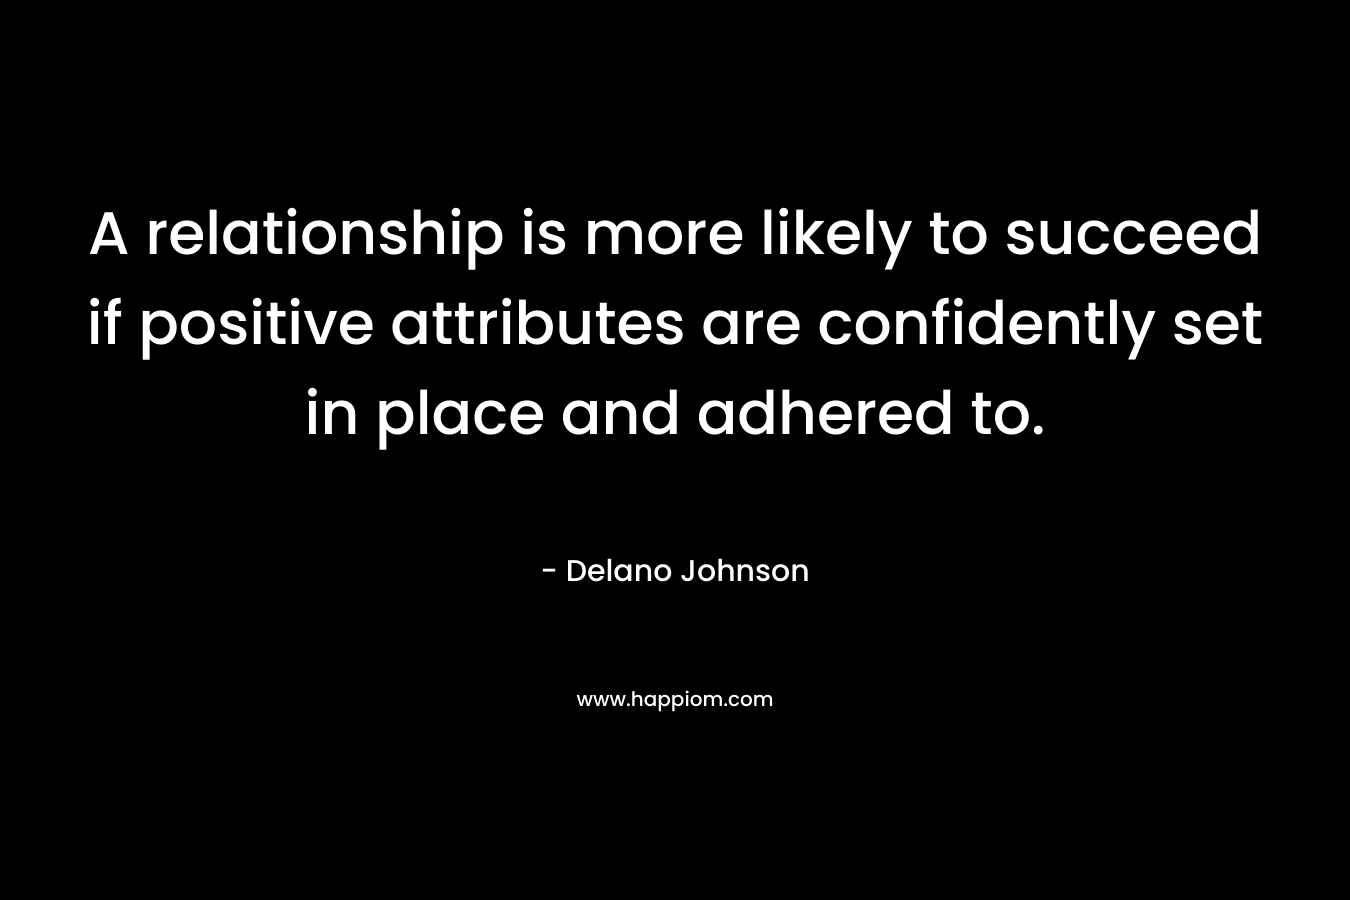 A relationship is more likely to succeed if positive attributes are confidently set in place and adhered to.